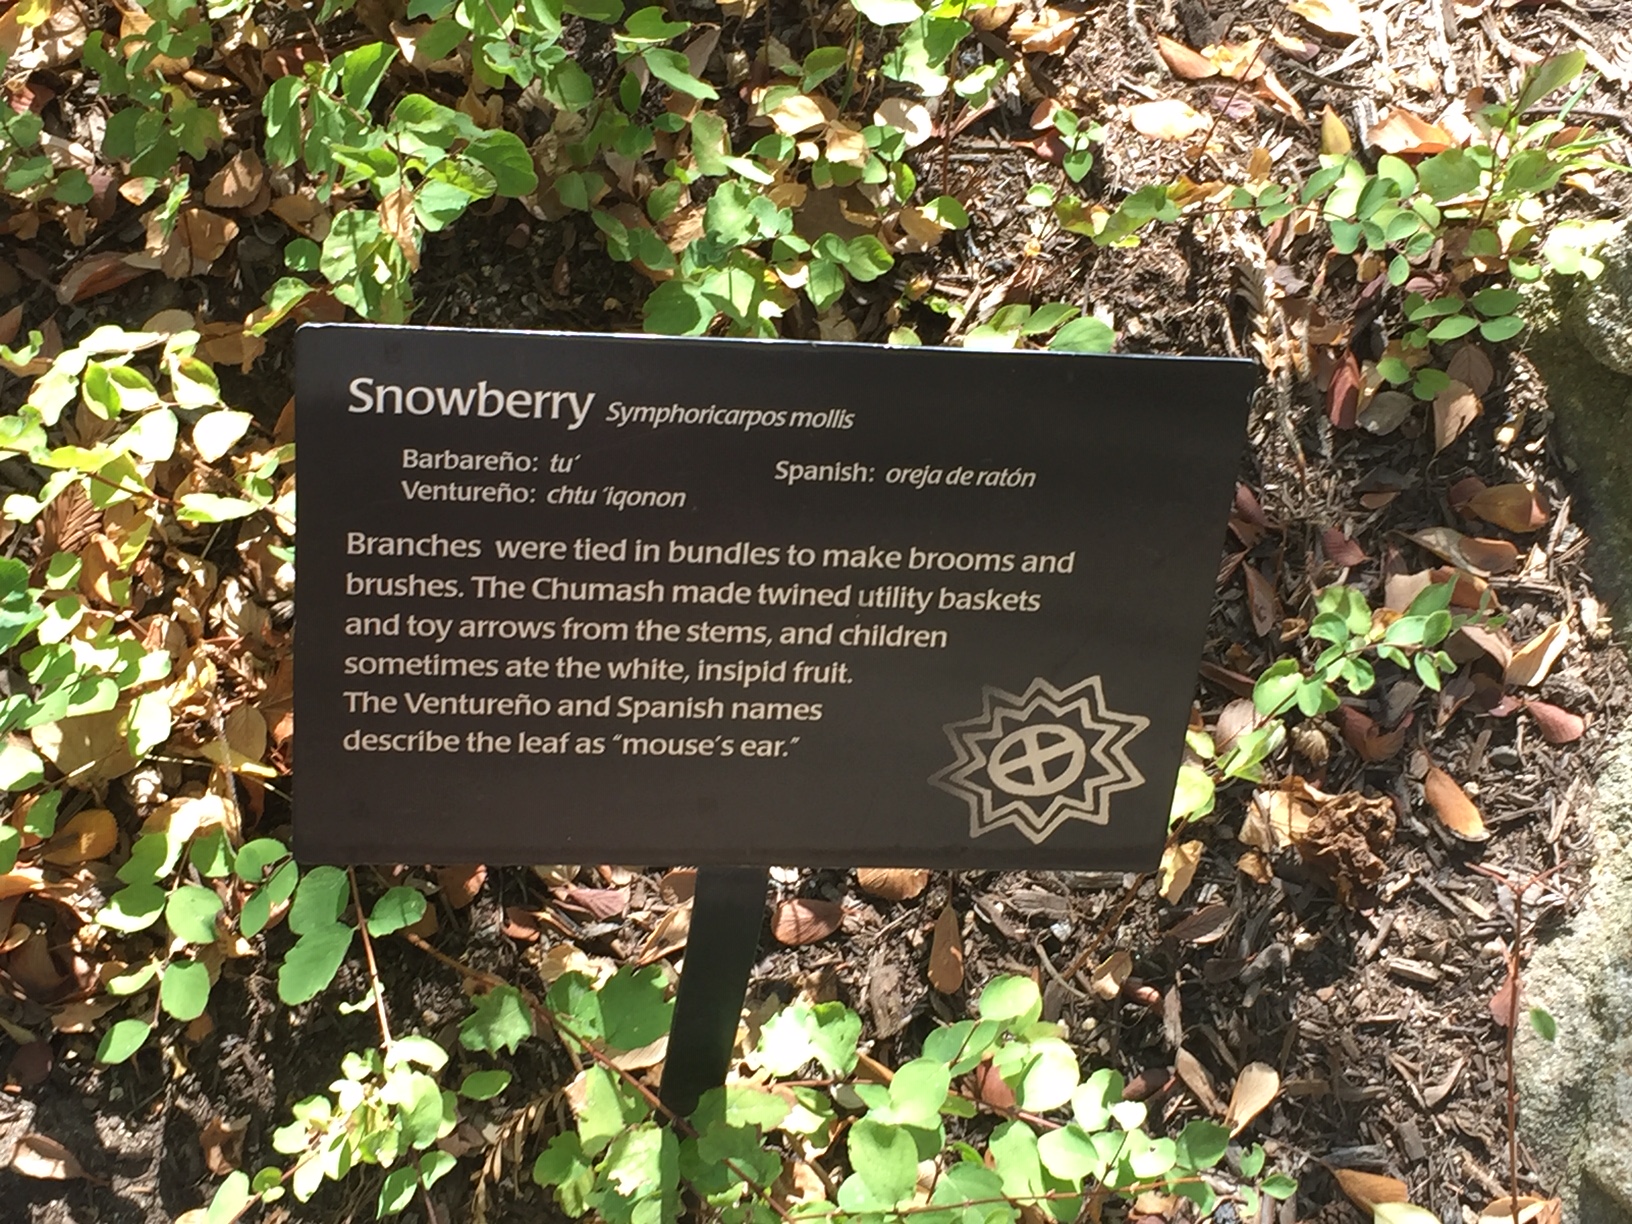 Snowberry plant label from the Suikinaik’oy Garden, featuring the English, Chumash, Latin and Spanish names of the plant and an English description of its use.